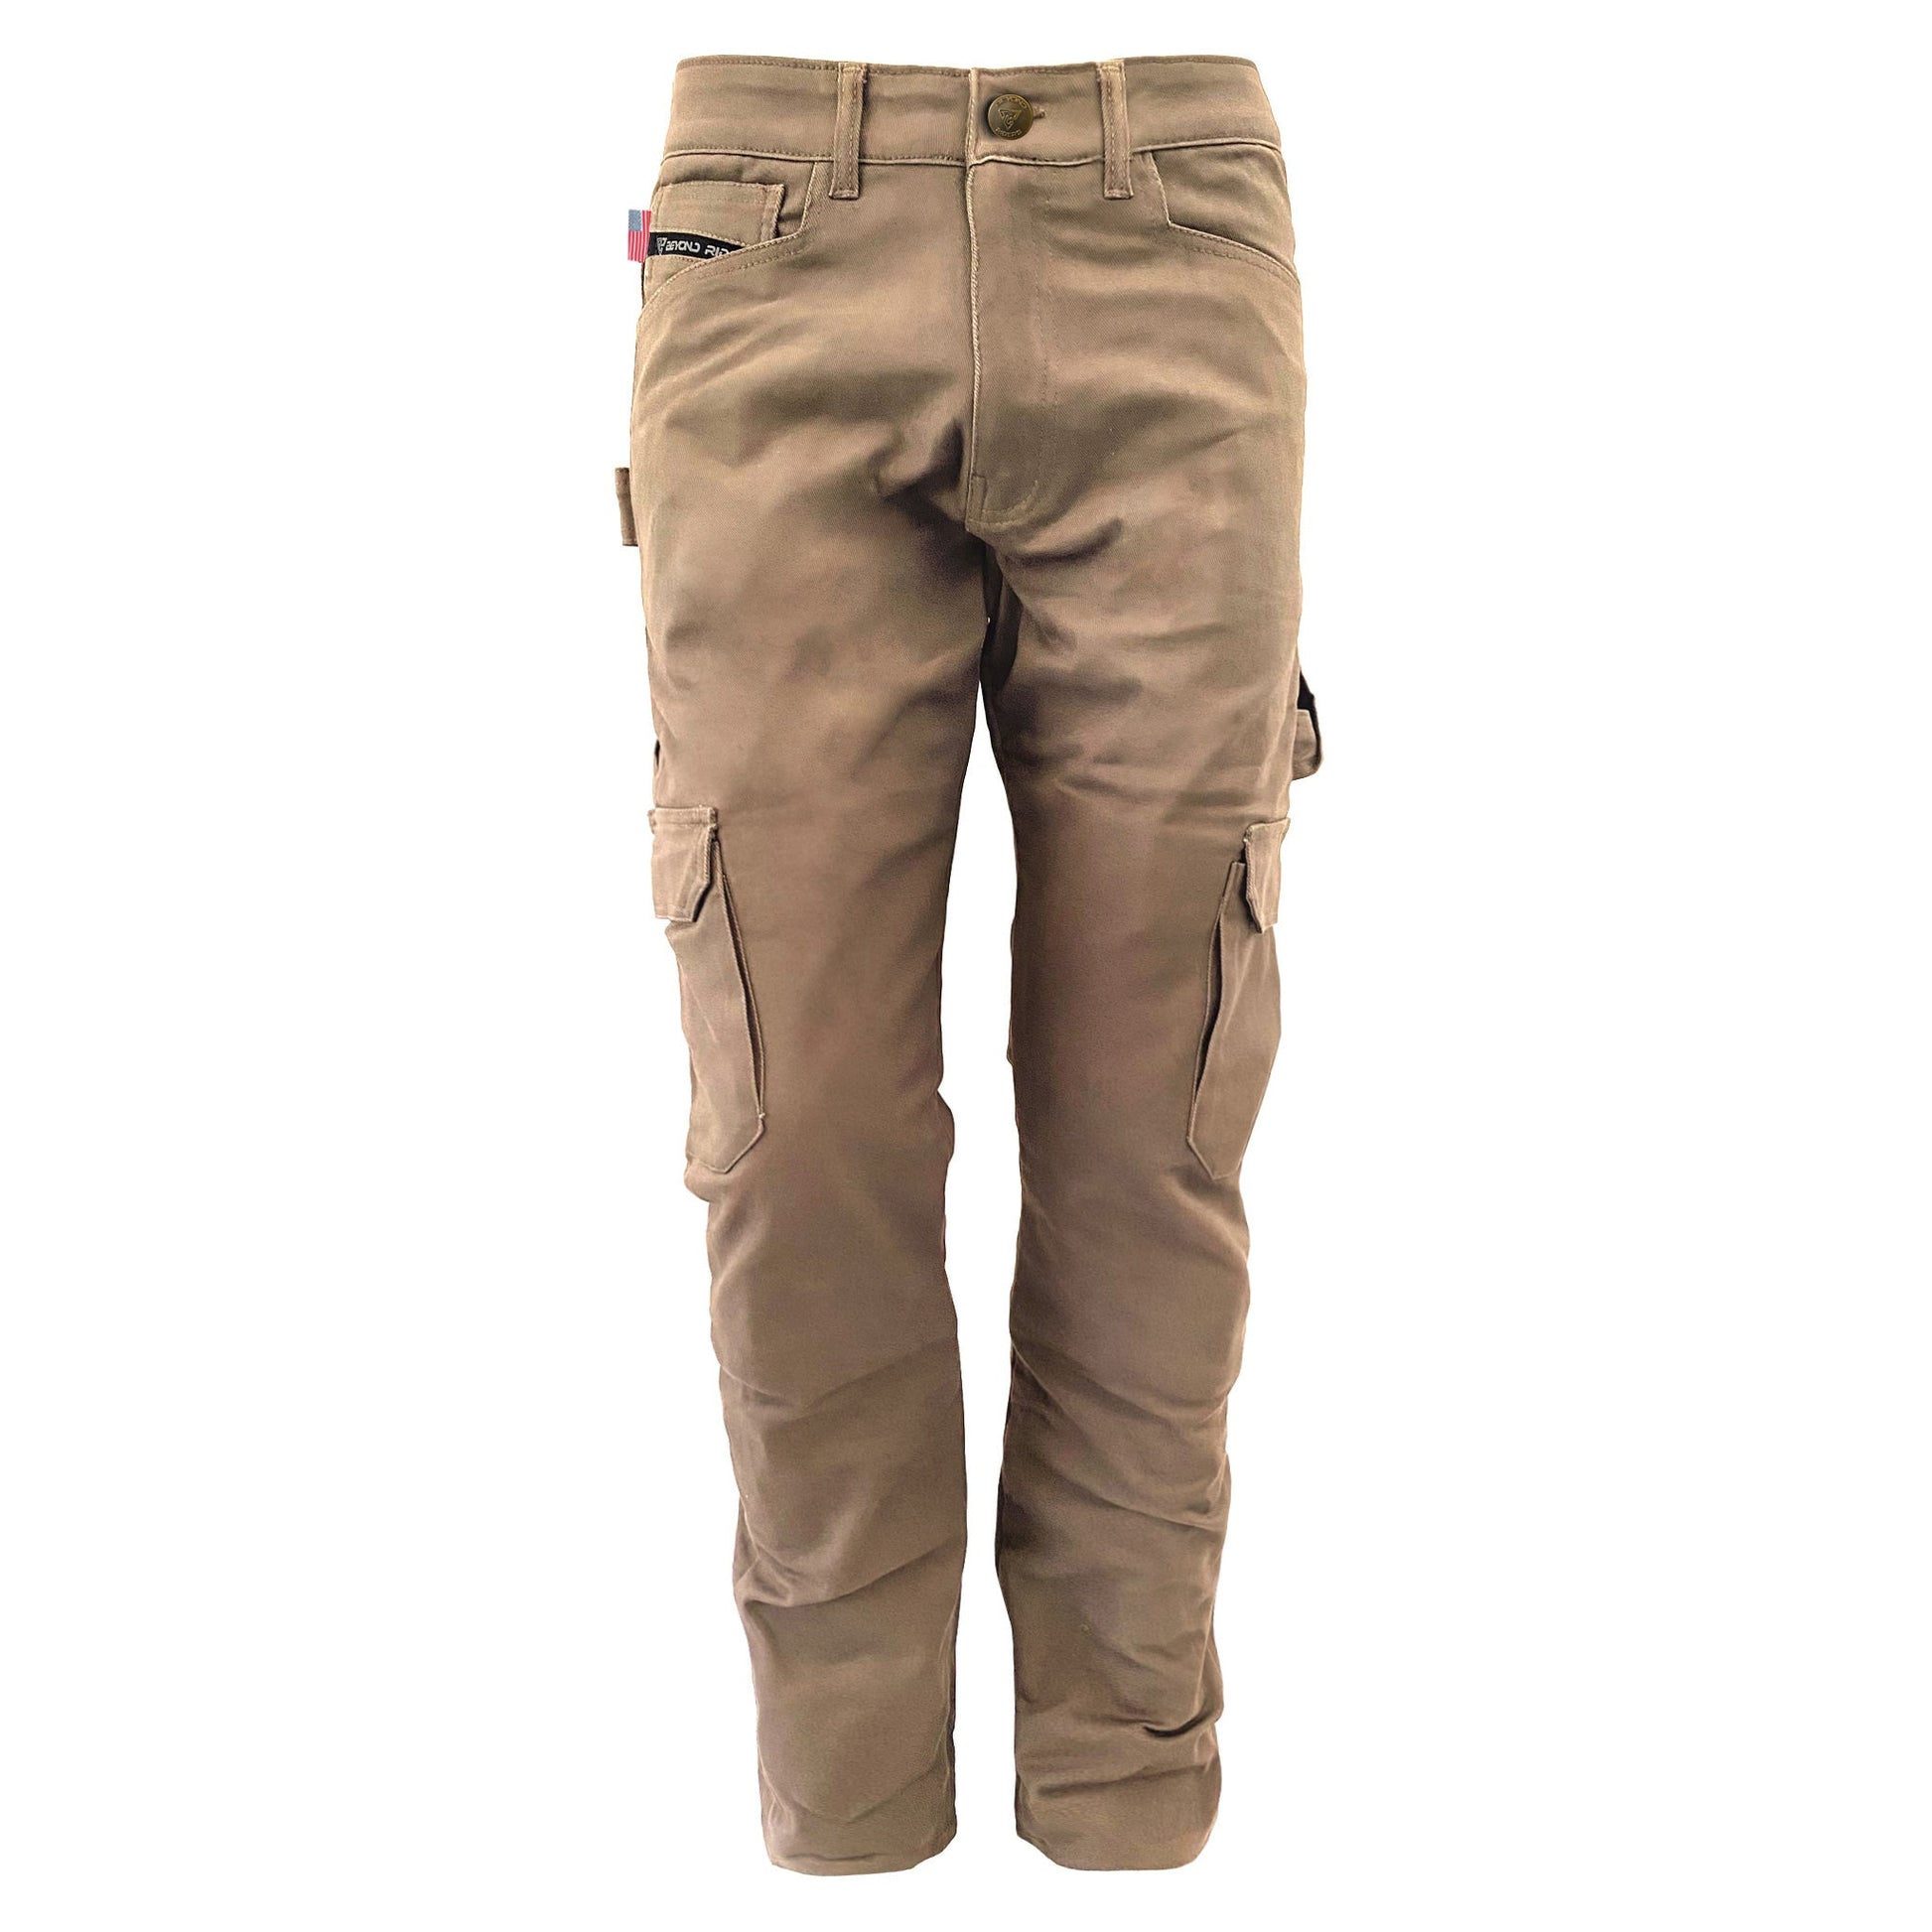 Relaxed Fit Cargo Pants - Khaki Solid with Pads - REVRides